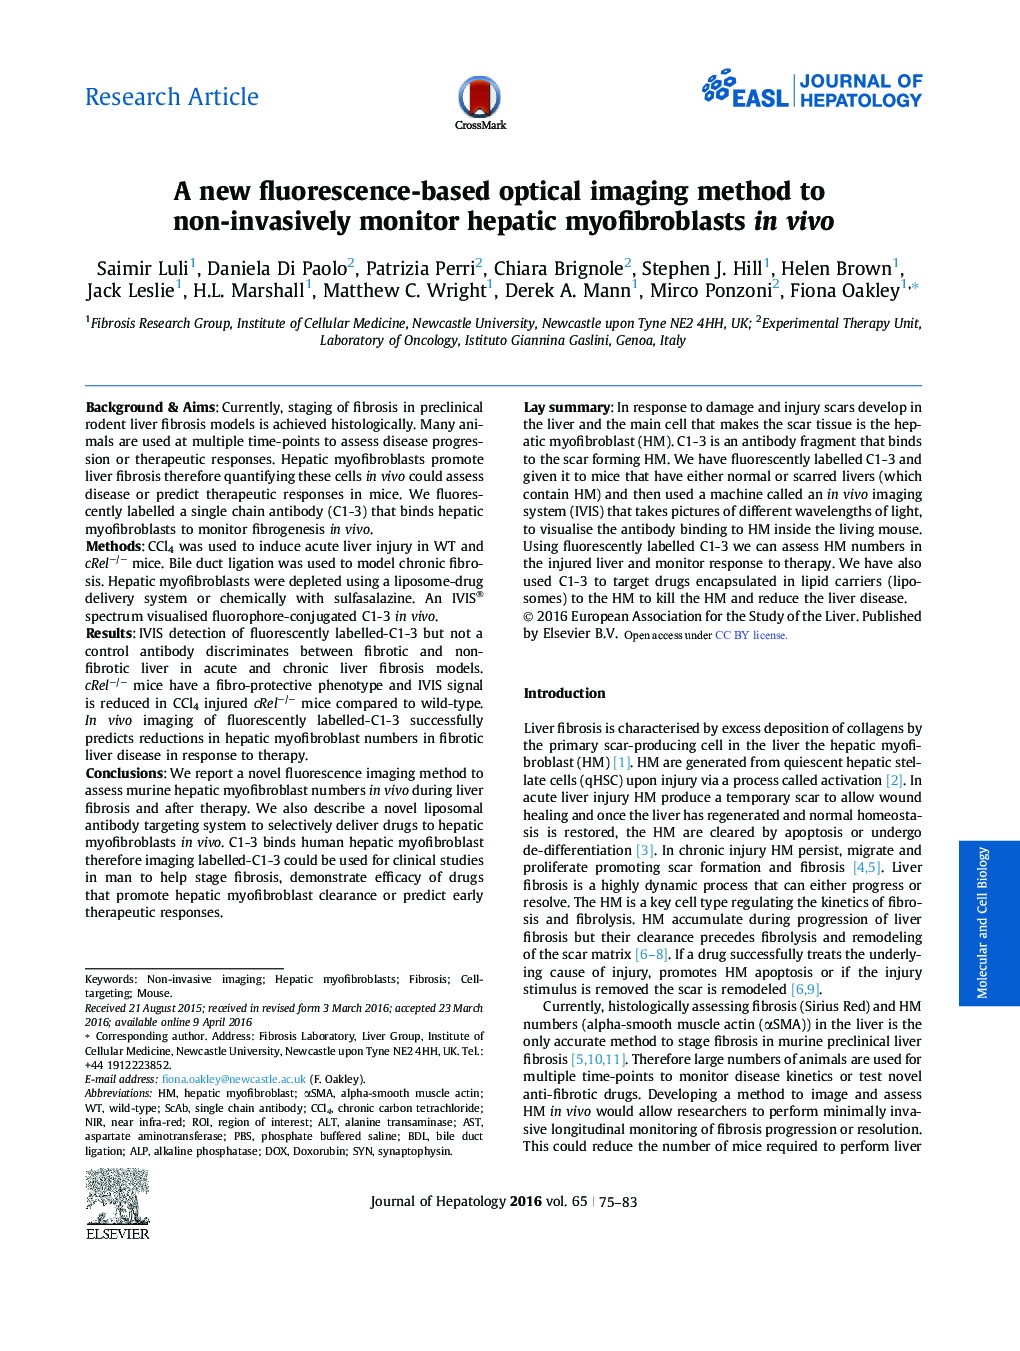 Research ArticleA new fluorescence-based optical imaging method to non-invasively monitor hepatic myofibroblasts in vivo